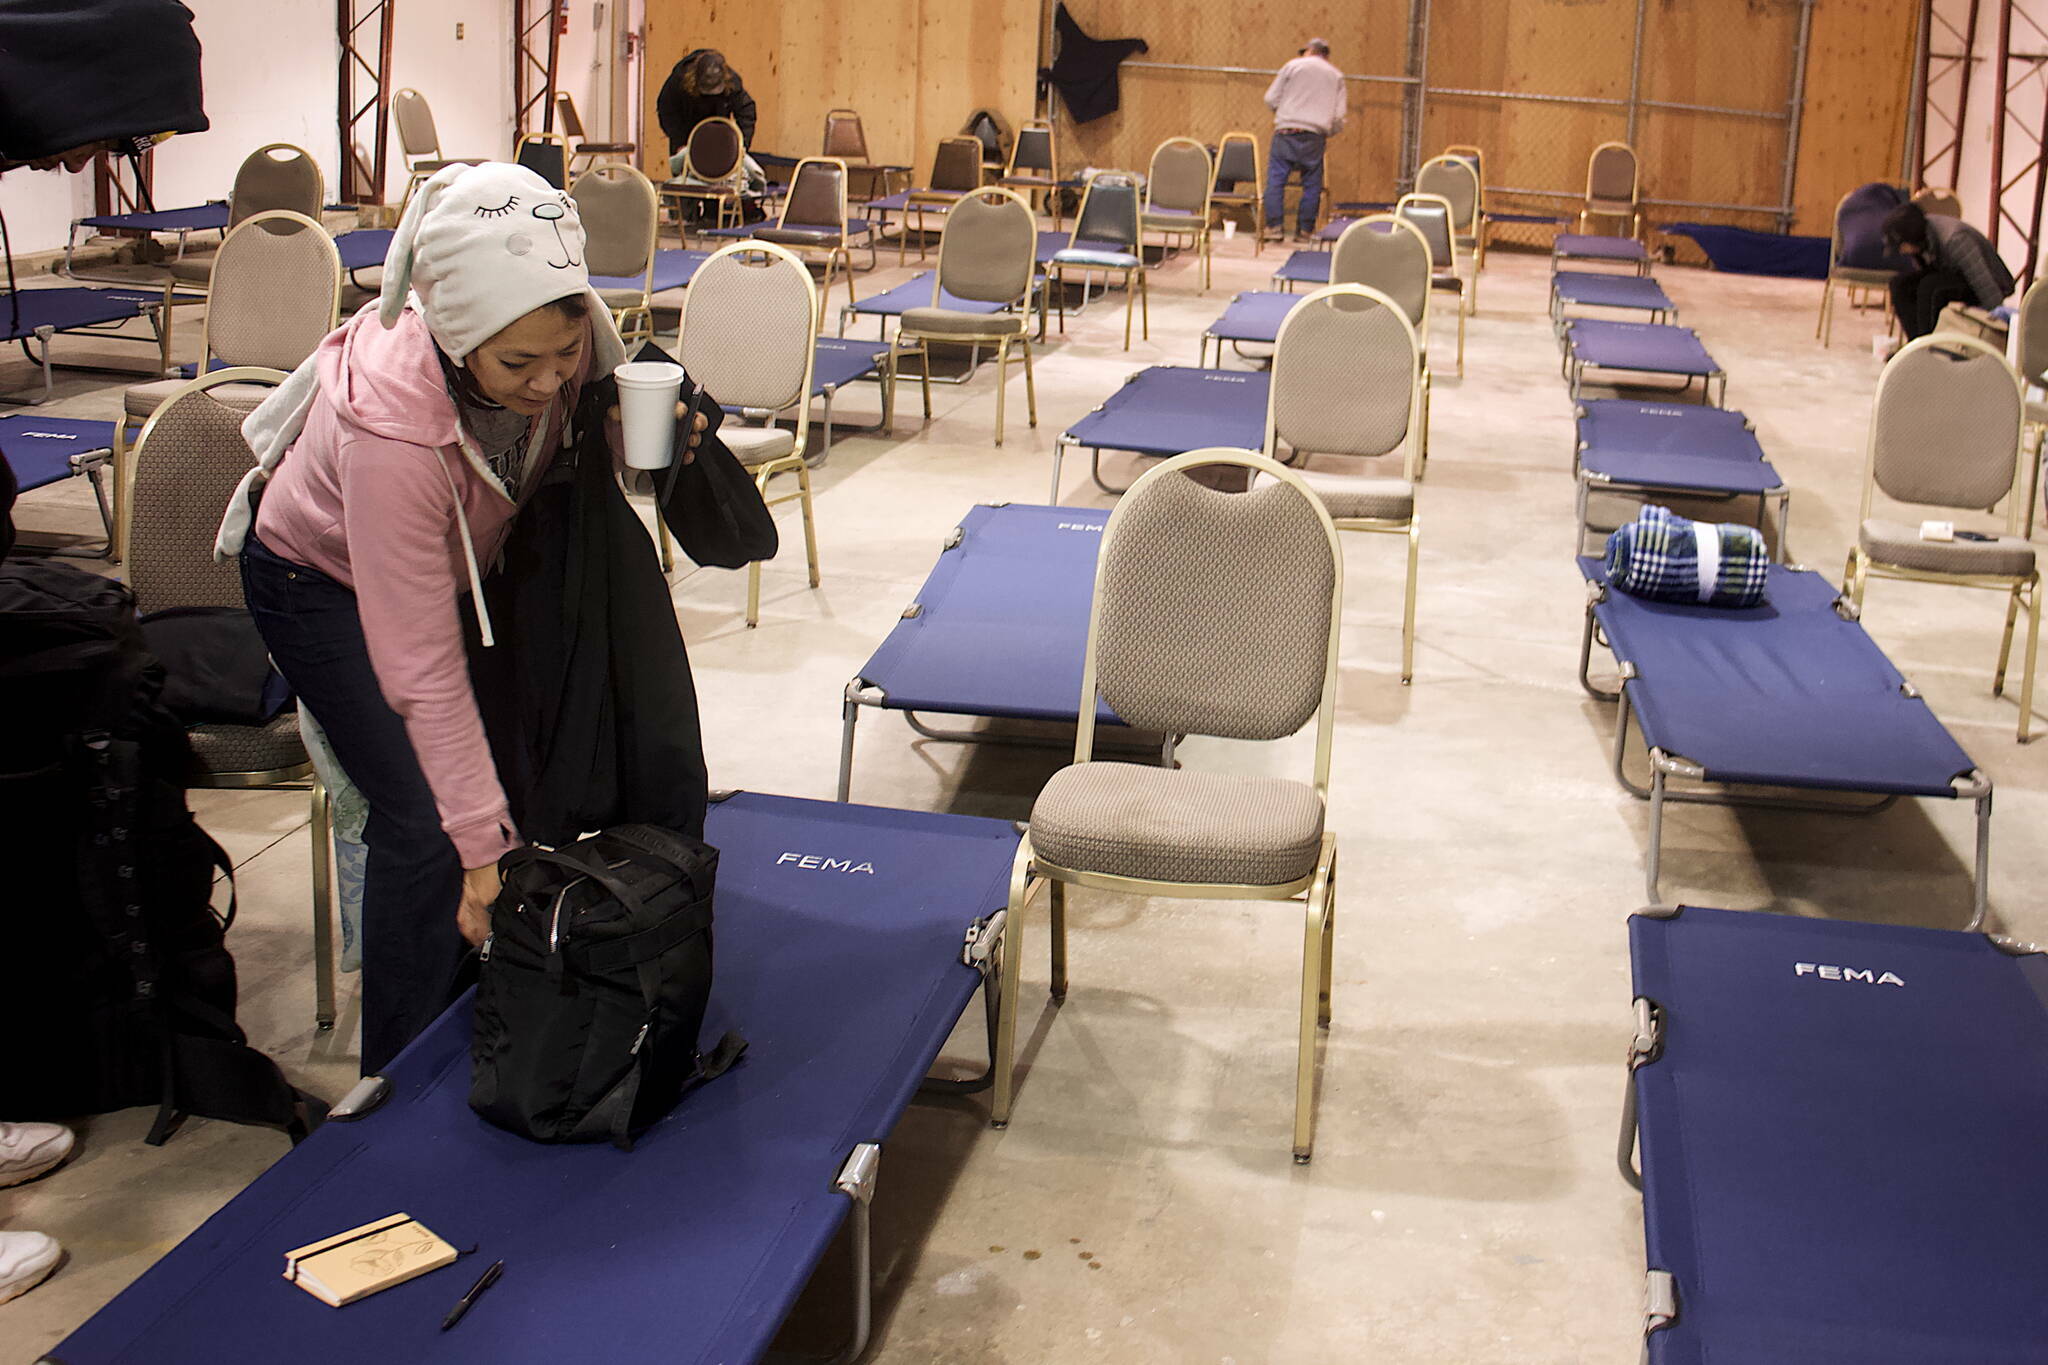 Melody Beierly packs her belongings Saturday, Oct. 21, after spending her first night at the city’s new cold weather emergency shelter. (Mark Sabbatini / Juneau Empire file photo)